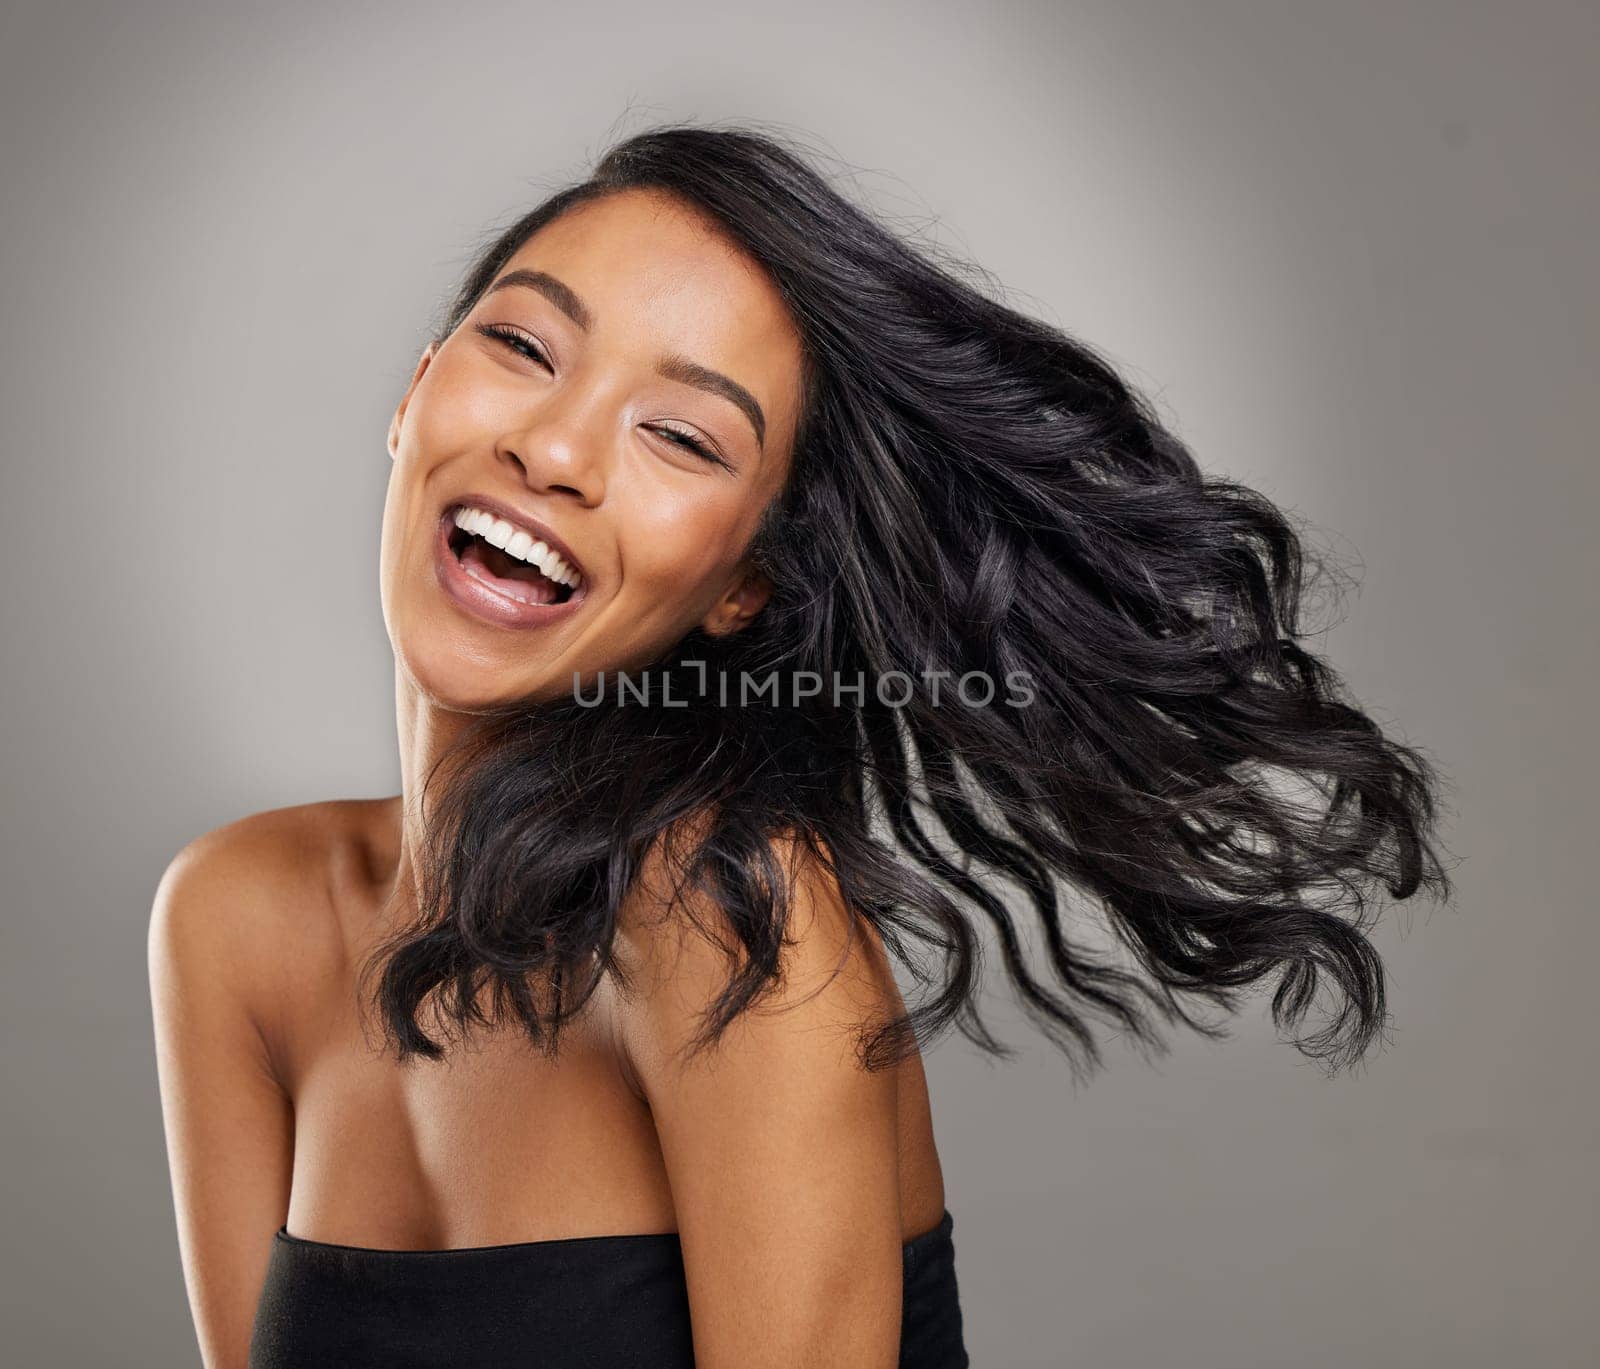 Hair, smile and portrait of happy woman in studio for cosmetics, treatment and shine on grey background. Happy, face and haircare for female model with volume, texture and keratin result satisfaction.